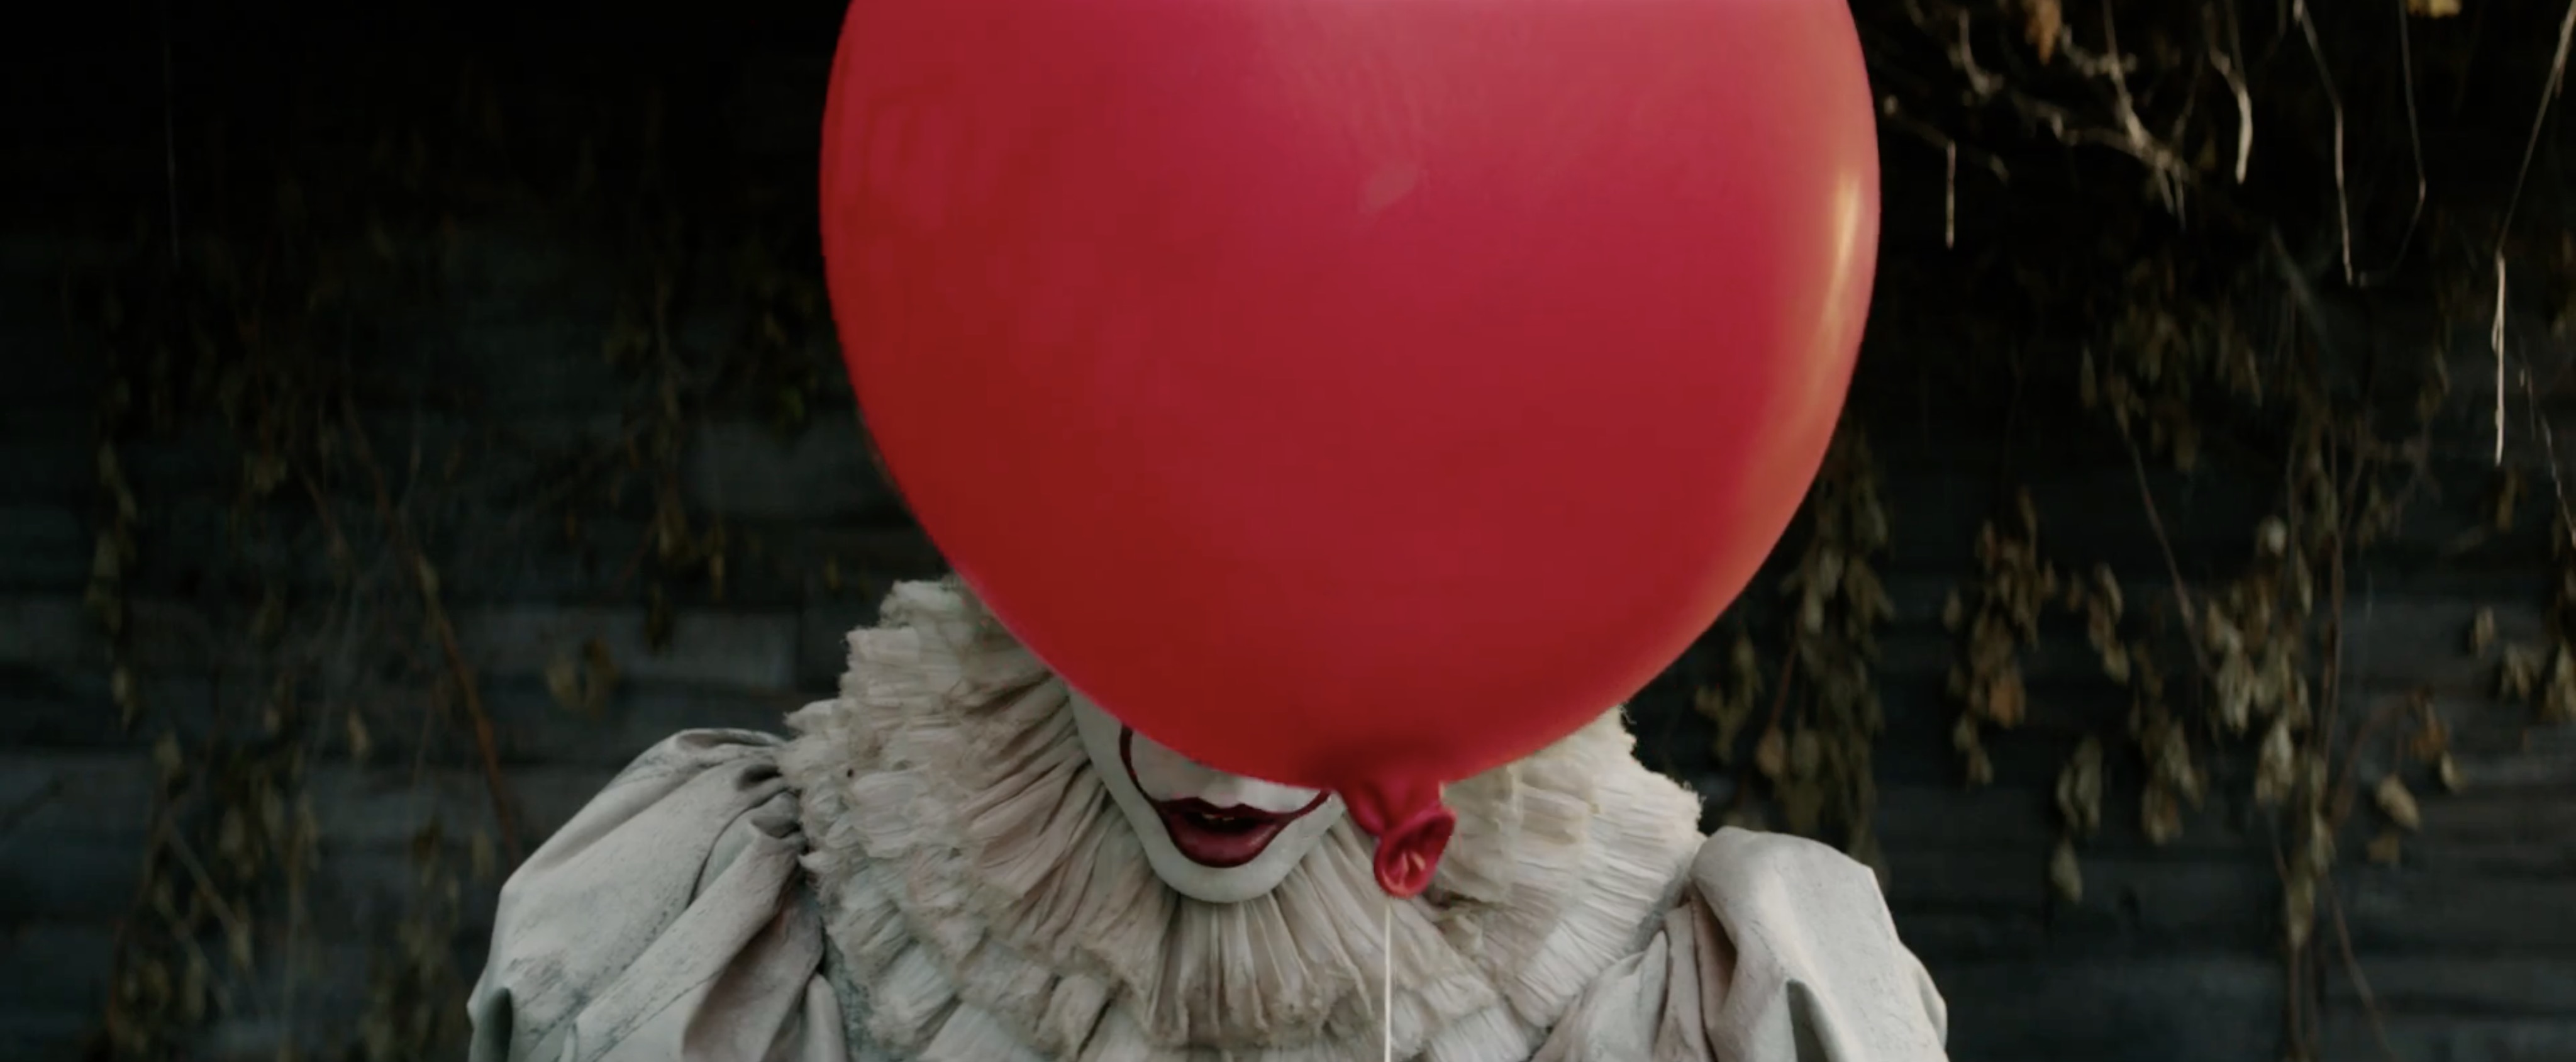 Stephen King's IT Pennywise courtesy of New Line Cinema